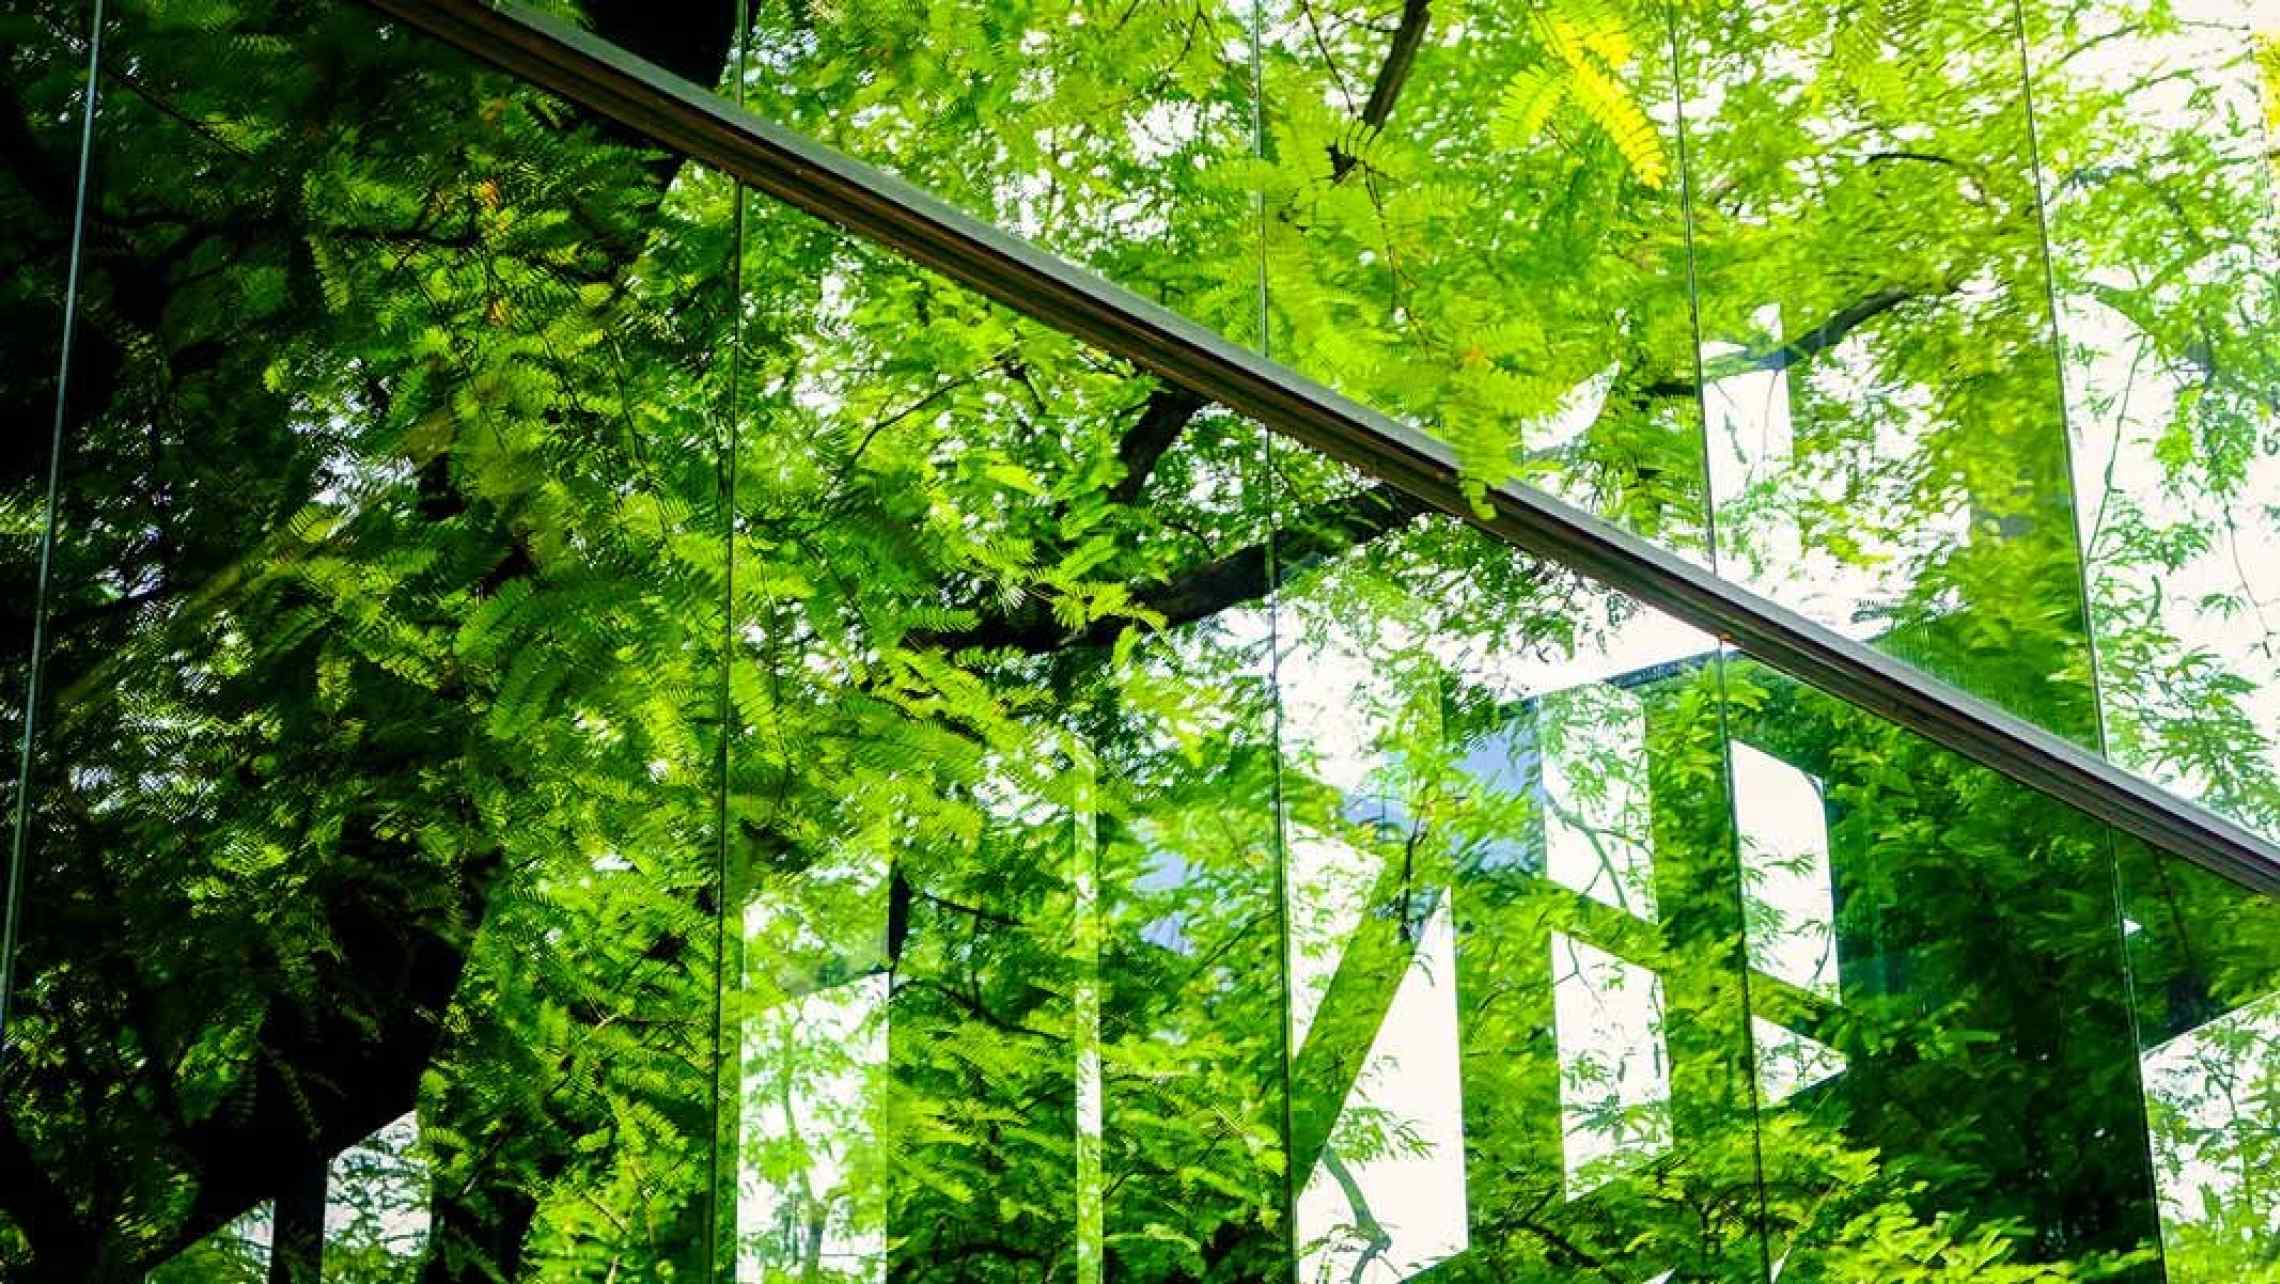 FIVE WAYS BUILDINGS OF THE FUTURE WILL USE BIOTECH TO BECOME LIVING THINGS